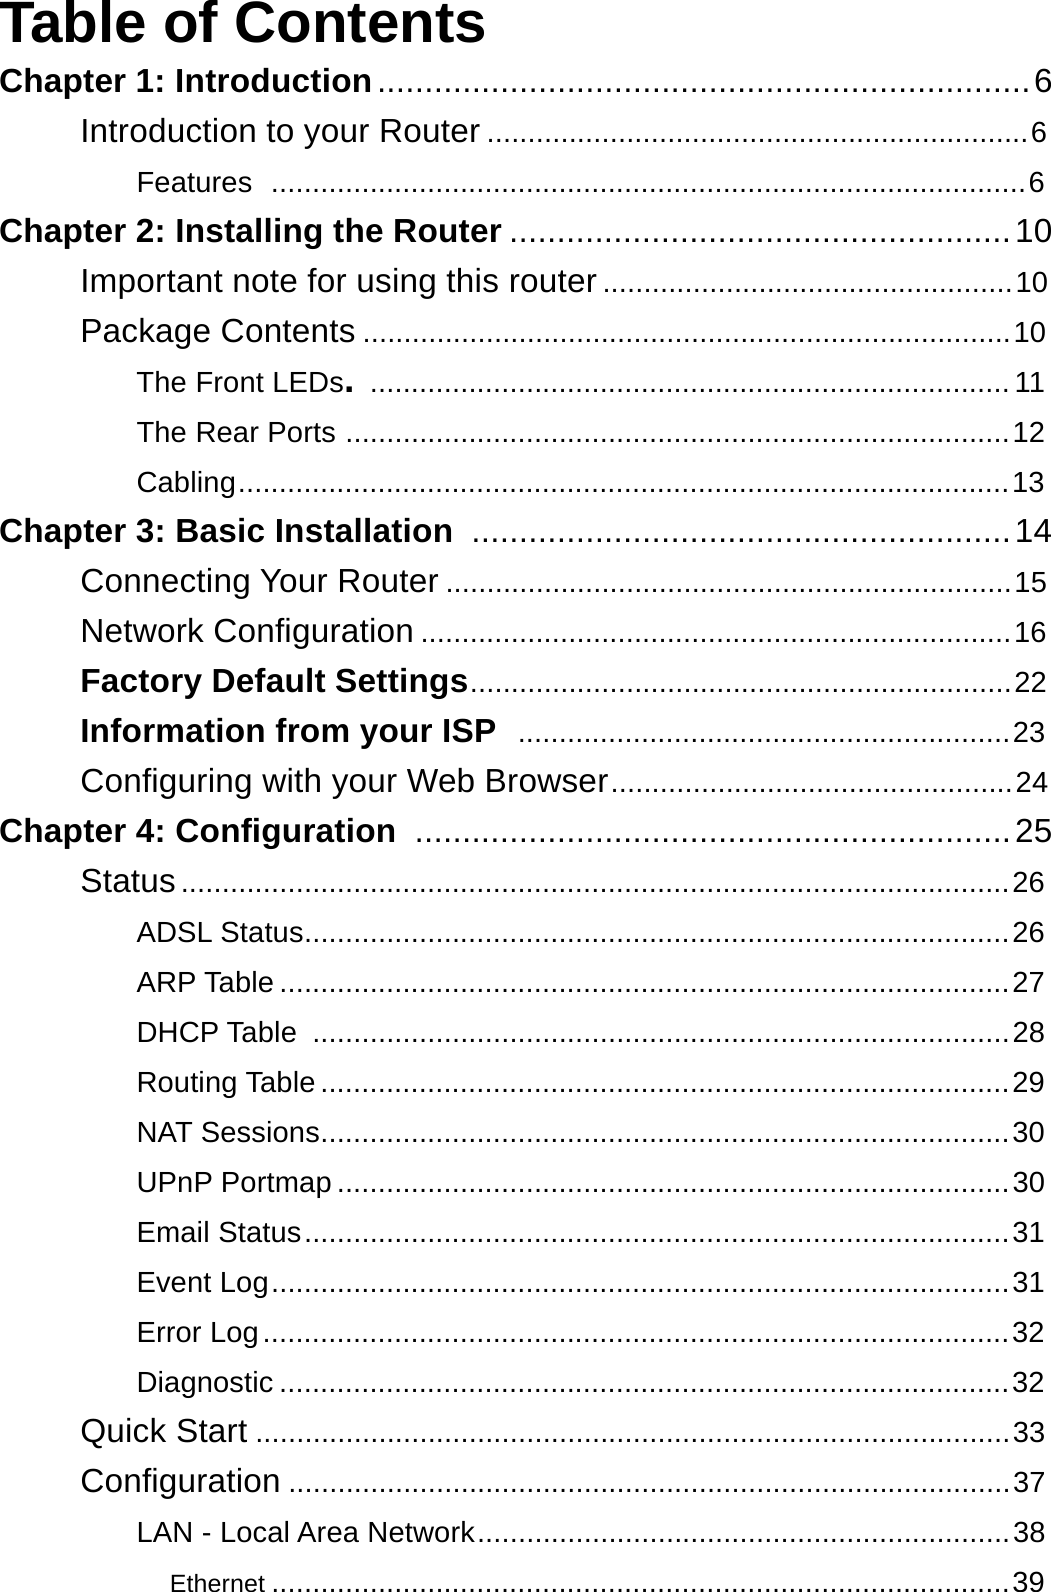 Table of Contents Chapter 1: Introduction ..................................................................... 6  Introduction to your Router .................................................................. 6  Features  ............................................................................................ 6  Chapter 2: Installing the Router ..................................................... 10  Important note for using this router .................................................. 10  Package Contents ............................................................................... 10 The Front LEDs. .............................................................................. 11  The Rear Ports ................................................................................. 12  Cabling.............................................................................................. 13  Chapter 3: Basic Installation  ......................................................... 14  Connecting Your Router ..................................................................... 15  Network Configuration ........................................................................ 16  Factory Default Settings.................................................................. 22  Information from your ISP  ............................................................ 23  Configuring with your Web Browser................................................. 24  Chapter 4: Configuration  ............................................................... 25  Status ..................................................................................................... 26  ADSL Status...................................................................................... 26  ARP Table ......................................................................................... 27  DHCP Table  ..................................................................................... 28  Routing Table .................................................................................... 29  NAT Sessions.................................................................................... 30  UPnP Portmap .................................................................................. 30  Email Status ...................................................................................... 31  Event Log .......................................................................................... 31  Error Log ........................................................................................... 32  Diagnostic ......................................................................................... 32  Quick Start ............................................................................................ 33  Configuration ........................................................................................ 37  LAN - Local Area Network ................................................................. 38  Ethernet .......................................................................................... 39 